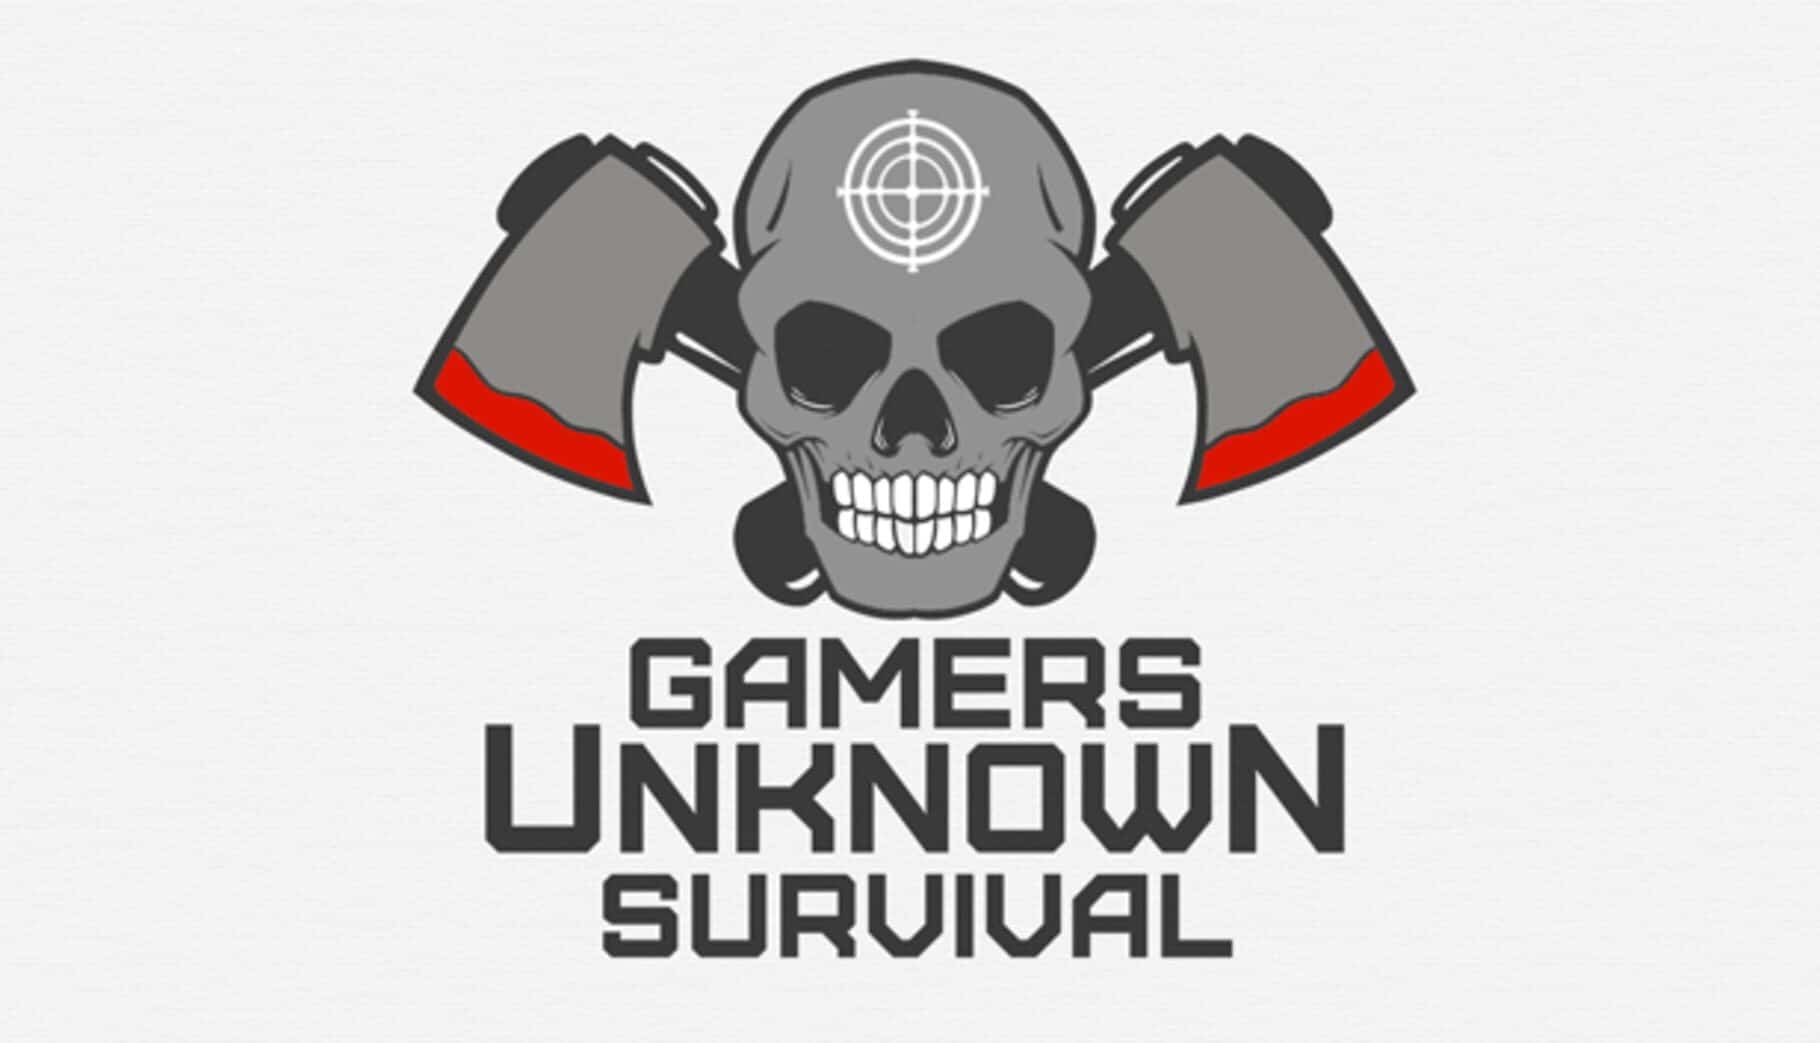 Gamers Unknown Survival